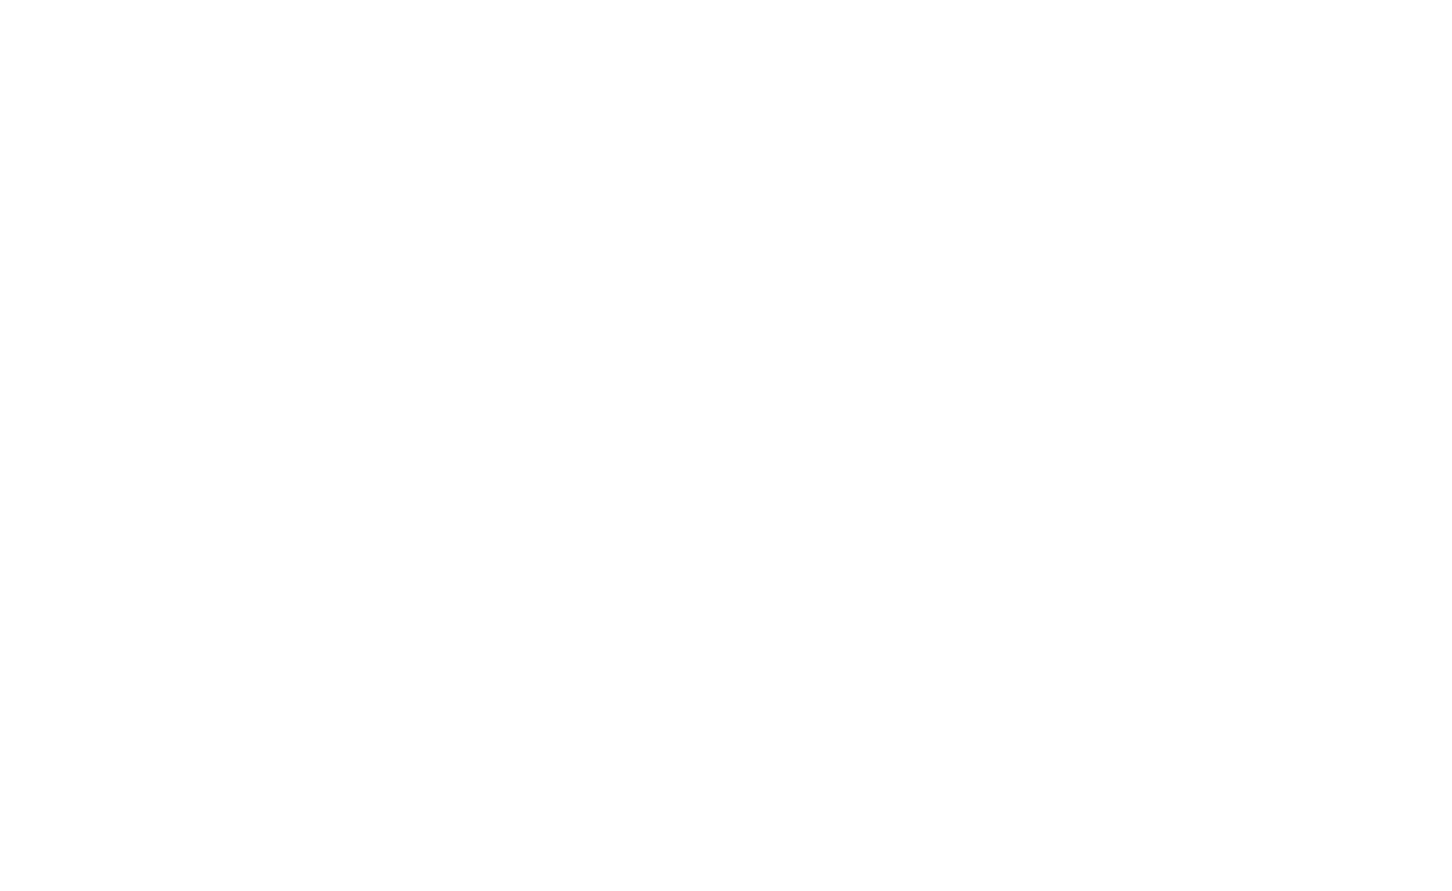 The most translated nouns or adjectives per language